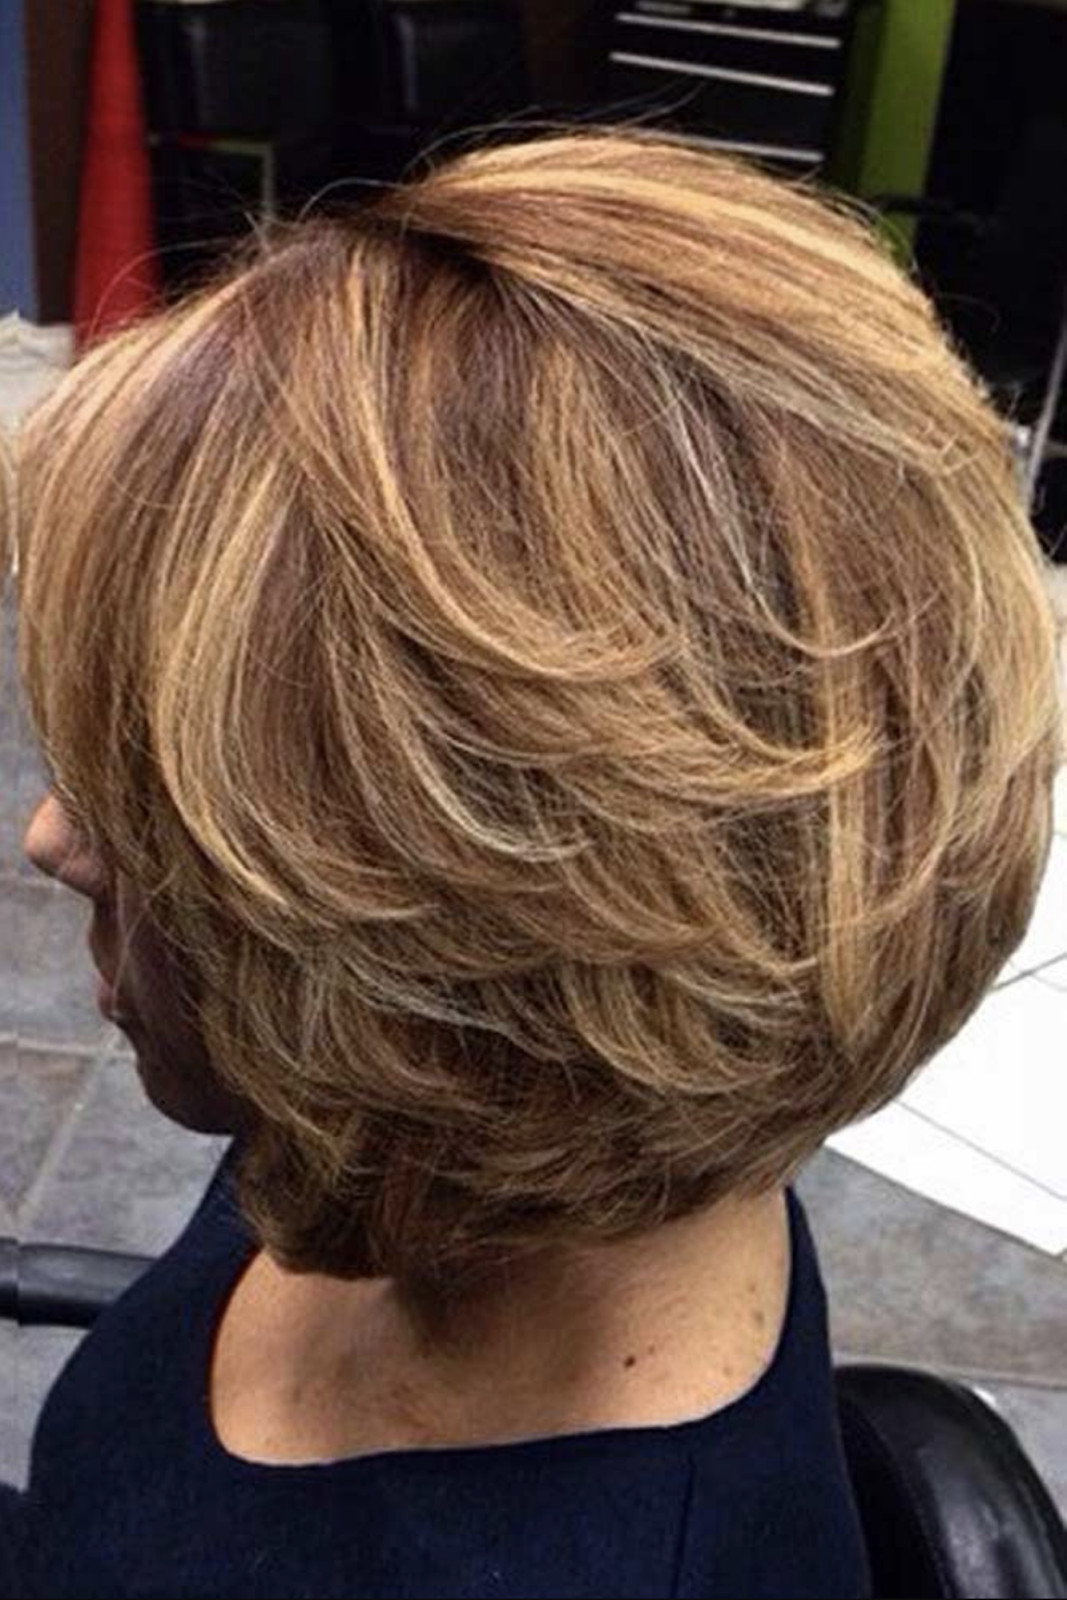 New Hairstyles 2020 Women
 2019 2020 Short Hairstyles for Women Over 50 That Are